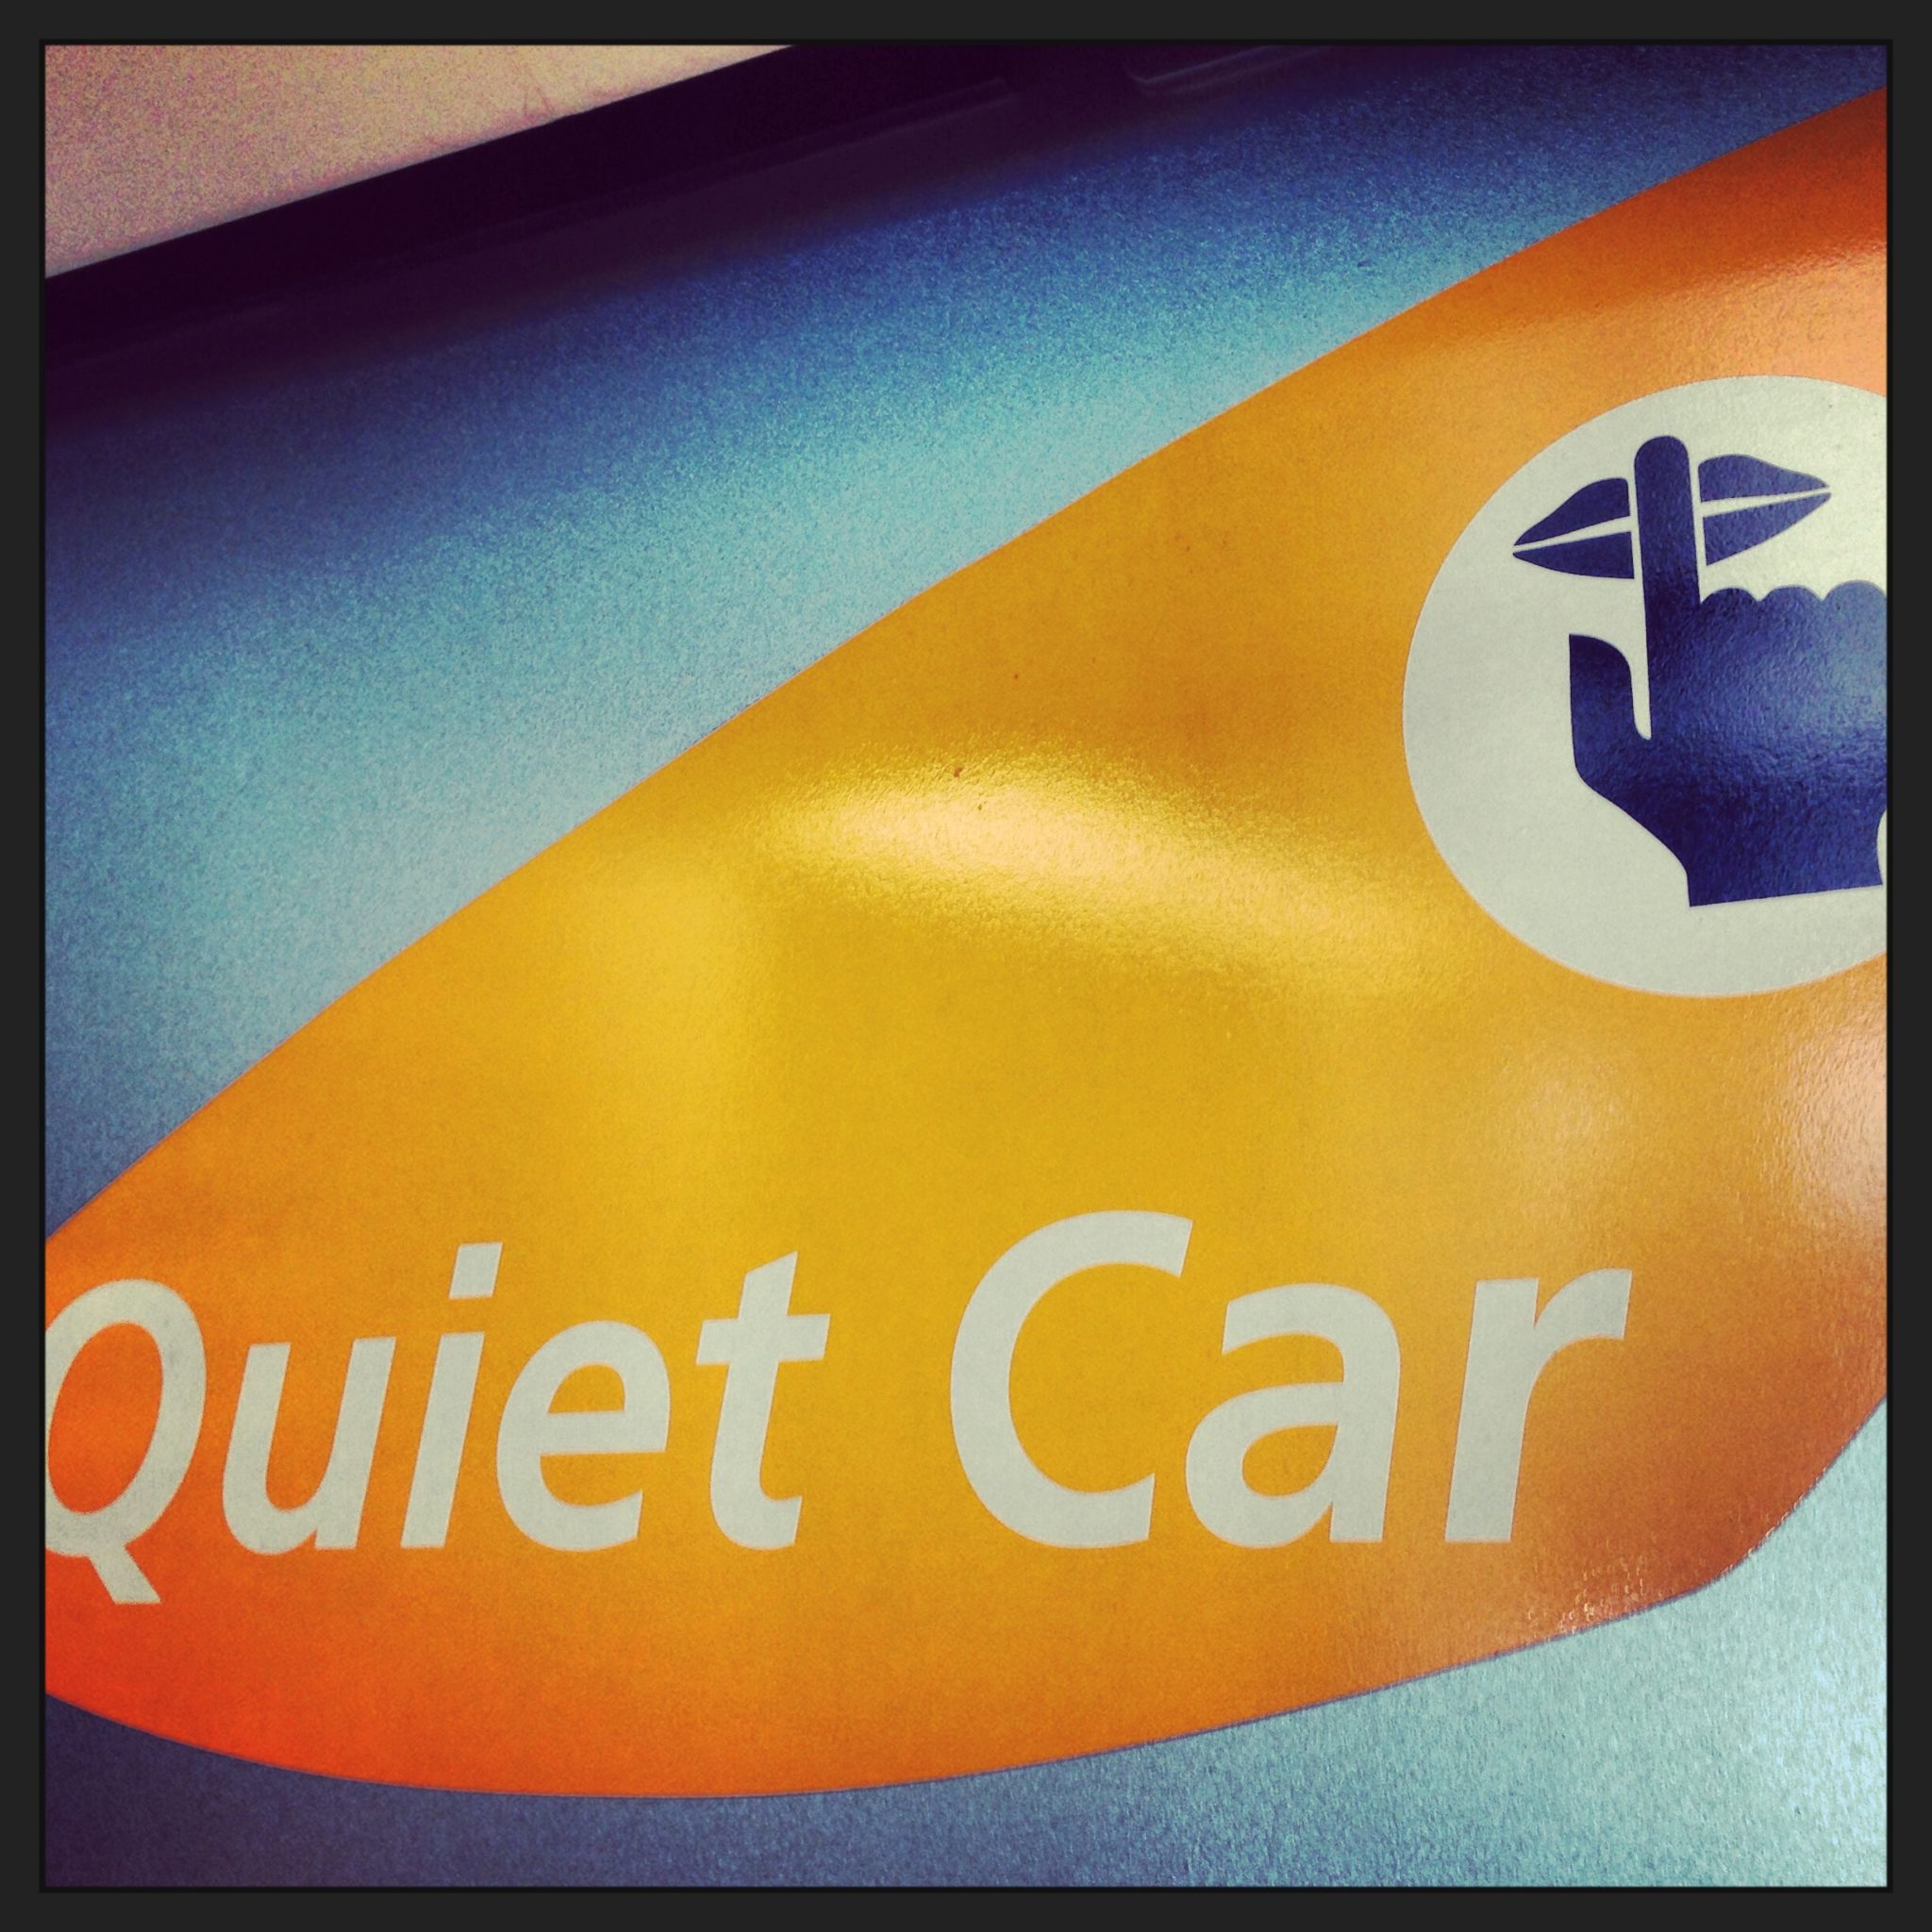 Sound of Silence: The Amtrak Quiet Car